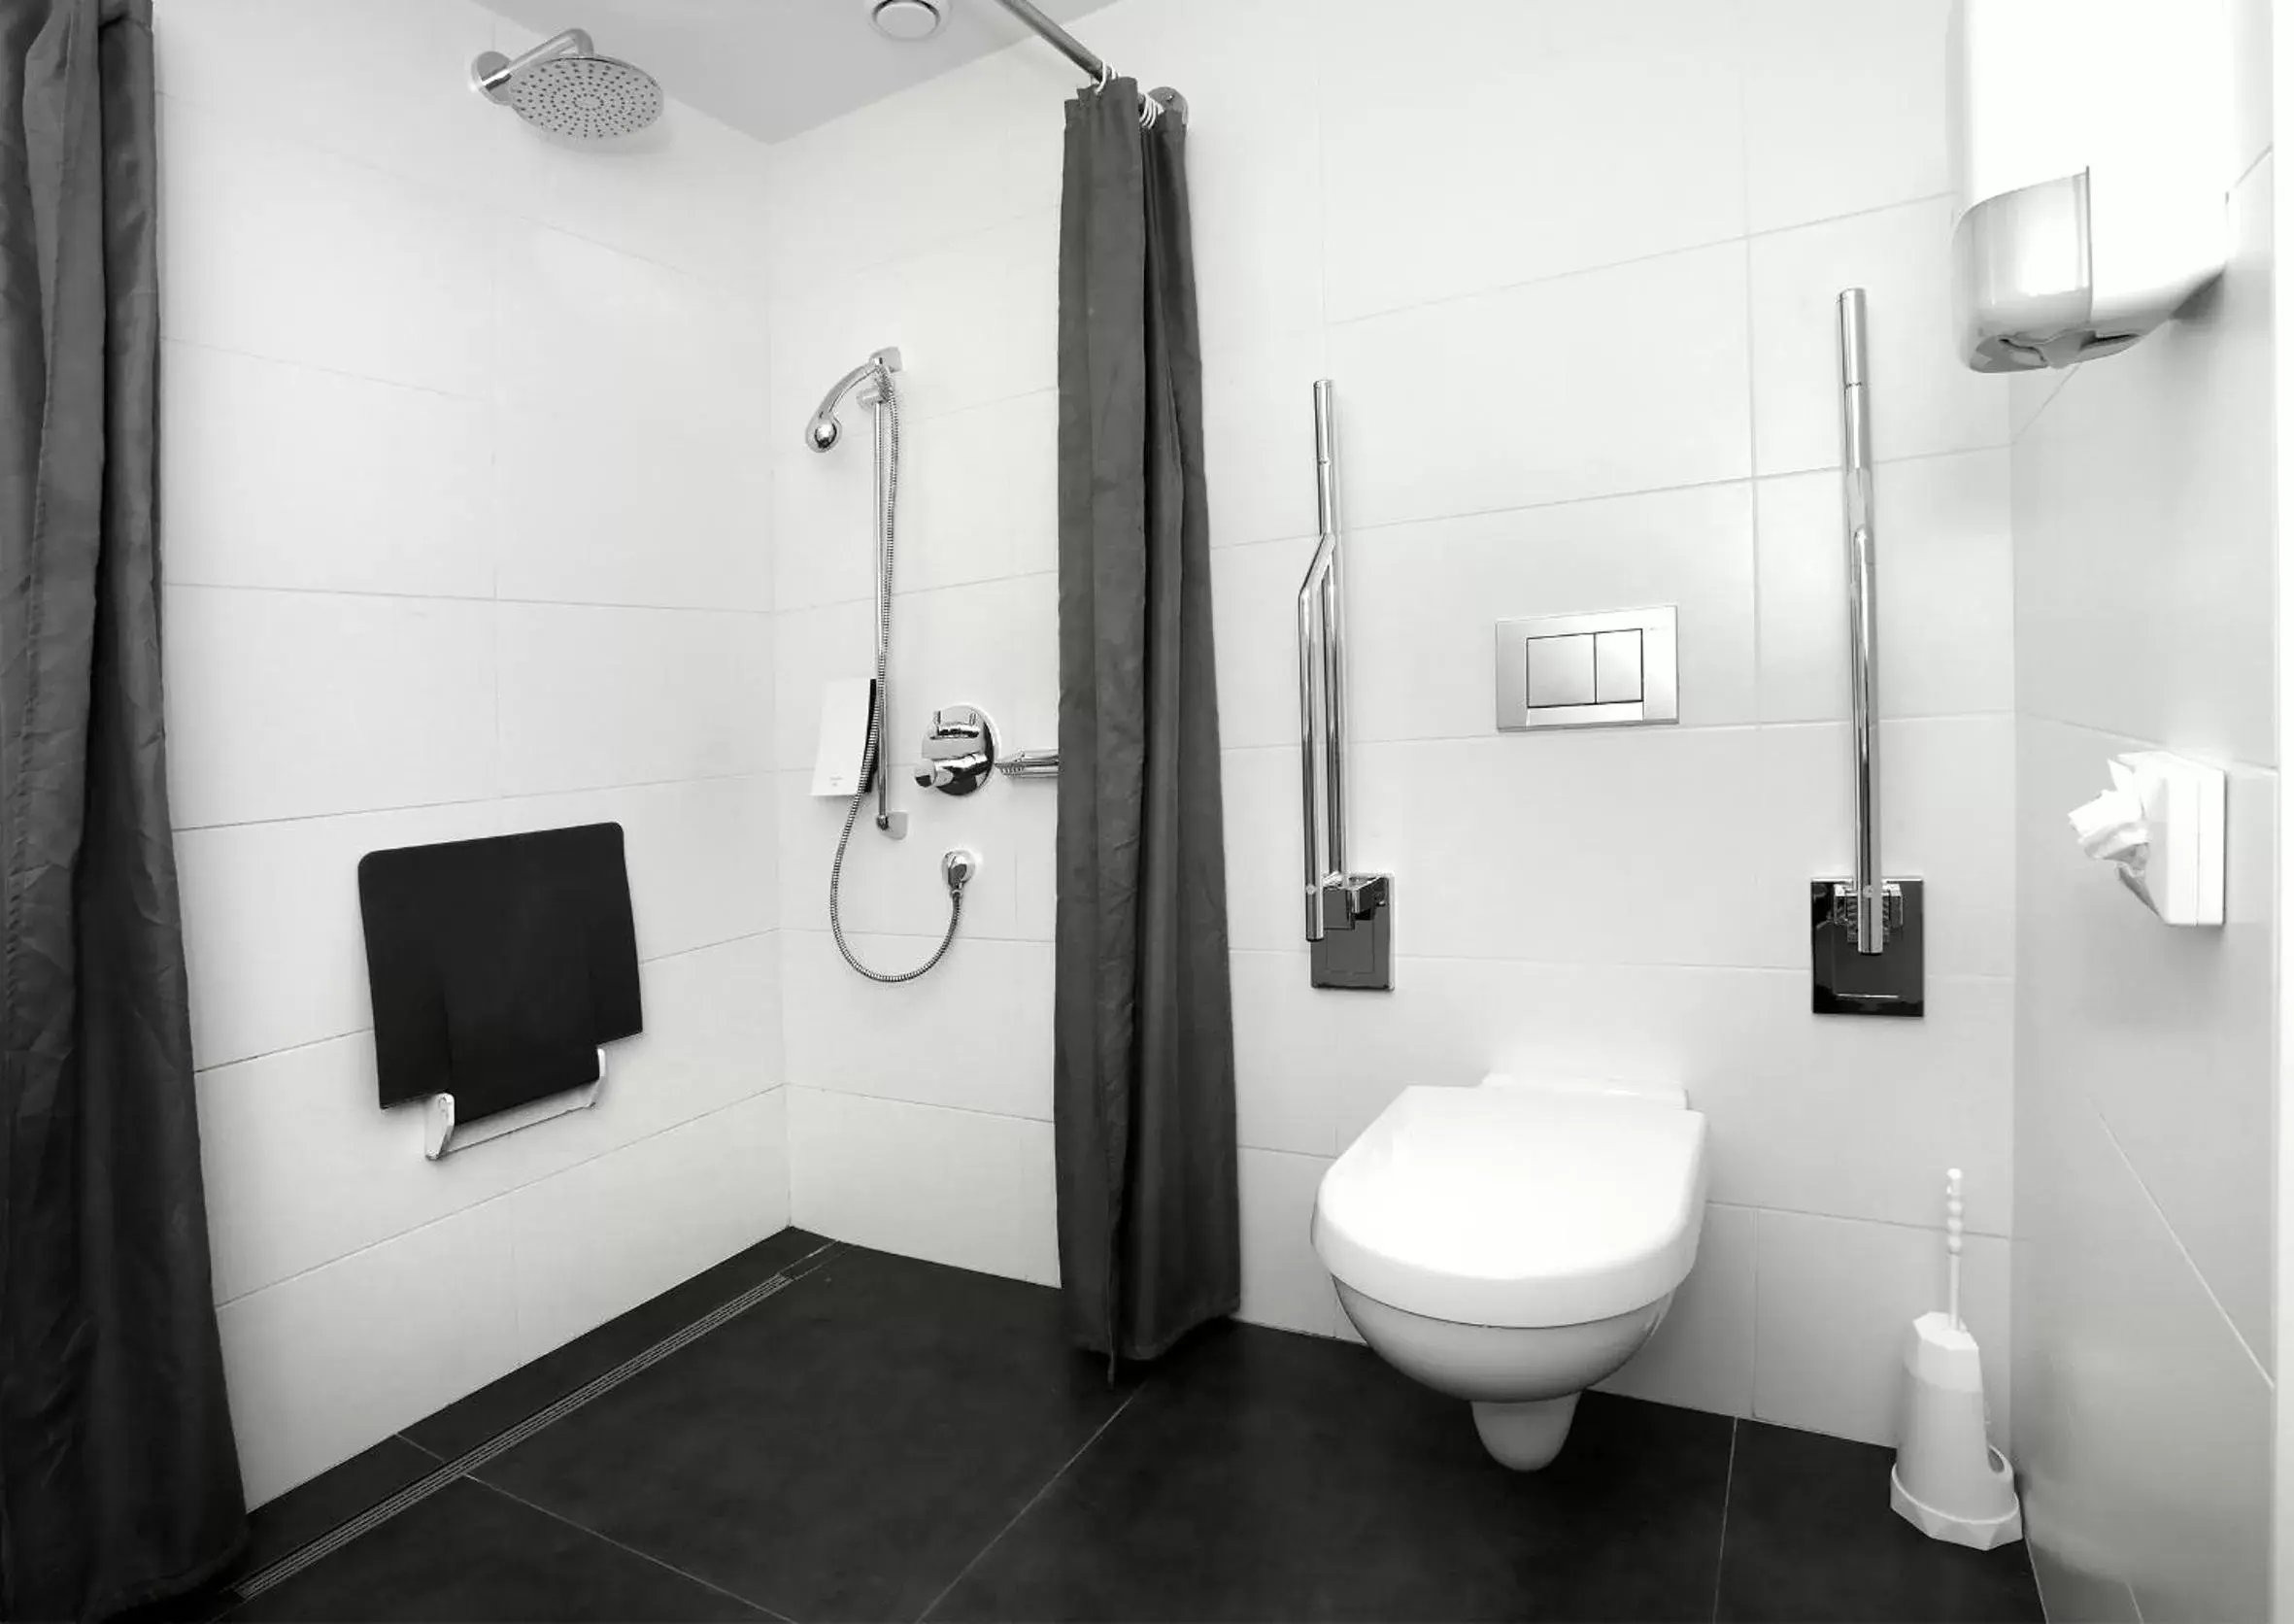 Facility for disabled guests, Bathroom in Churchill hotel Terneuzen